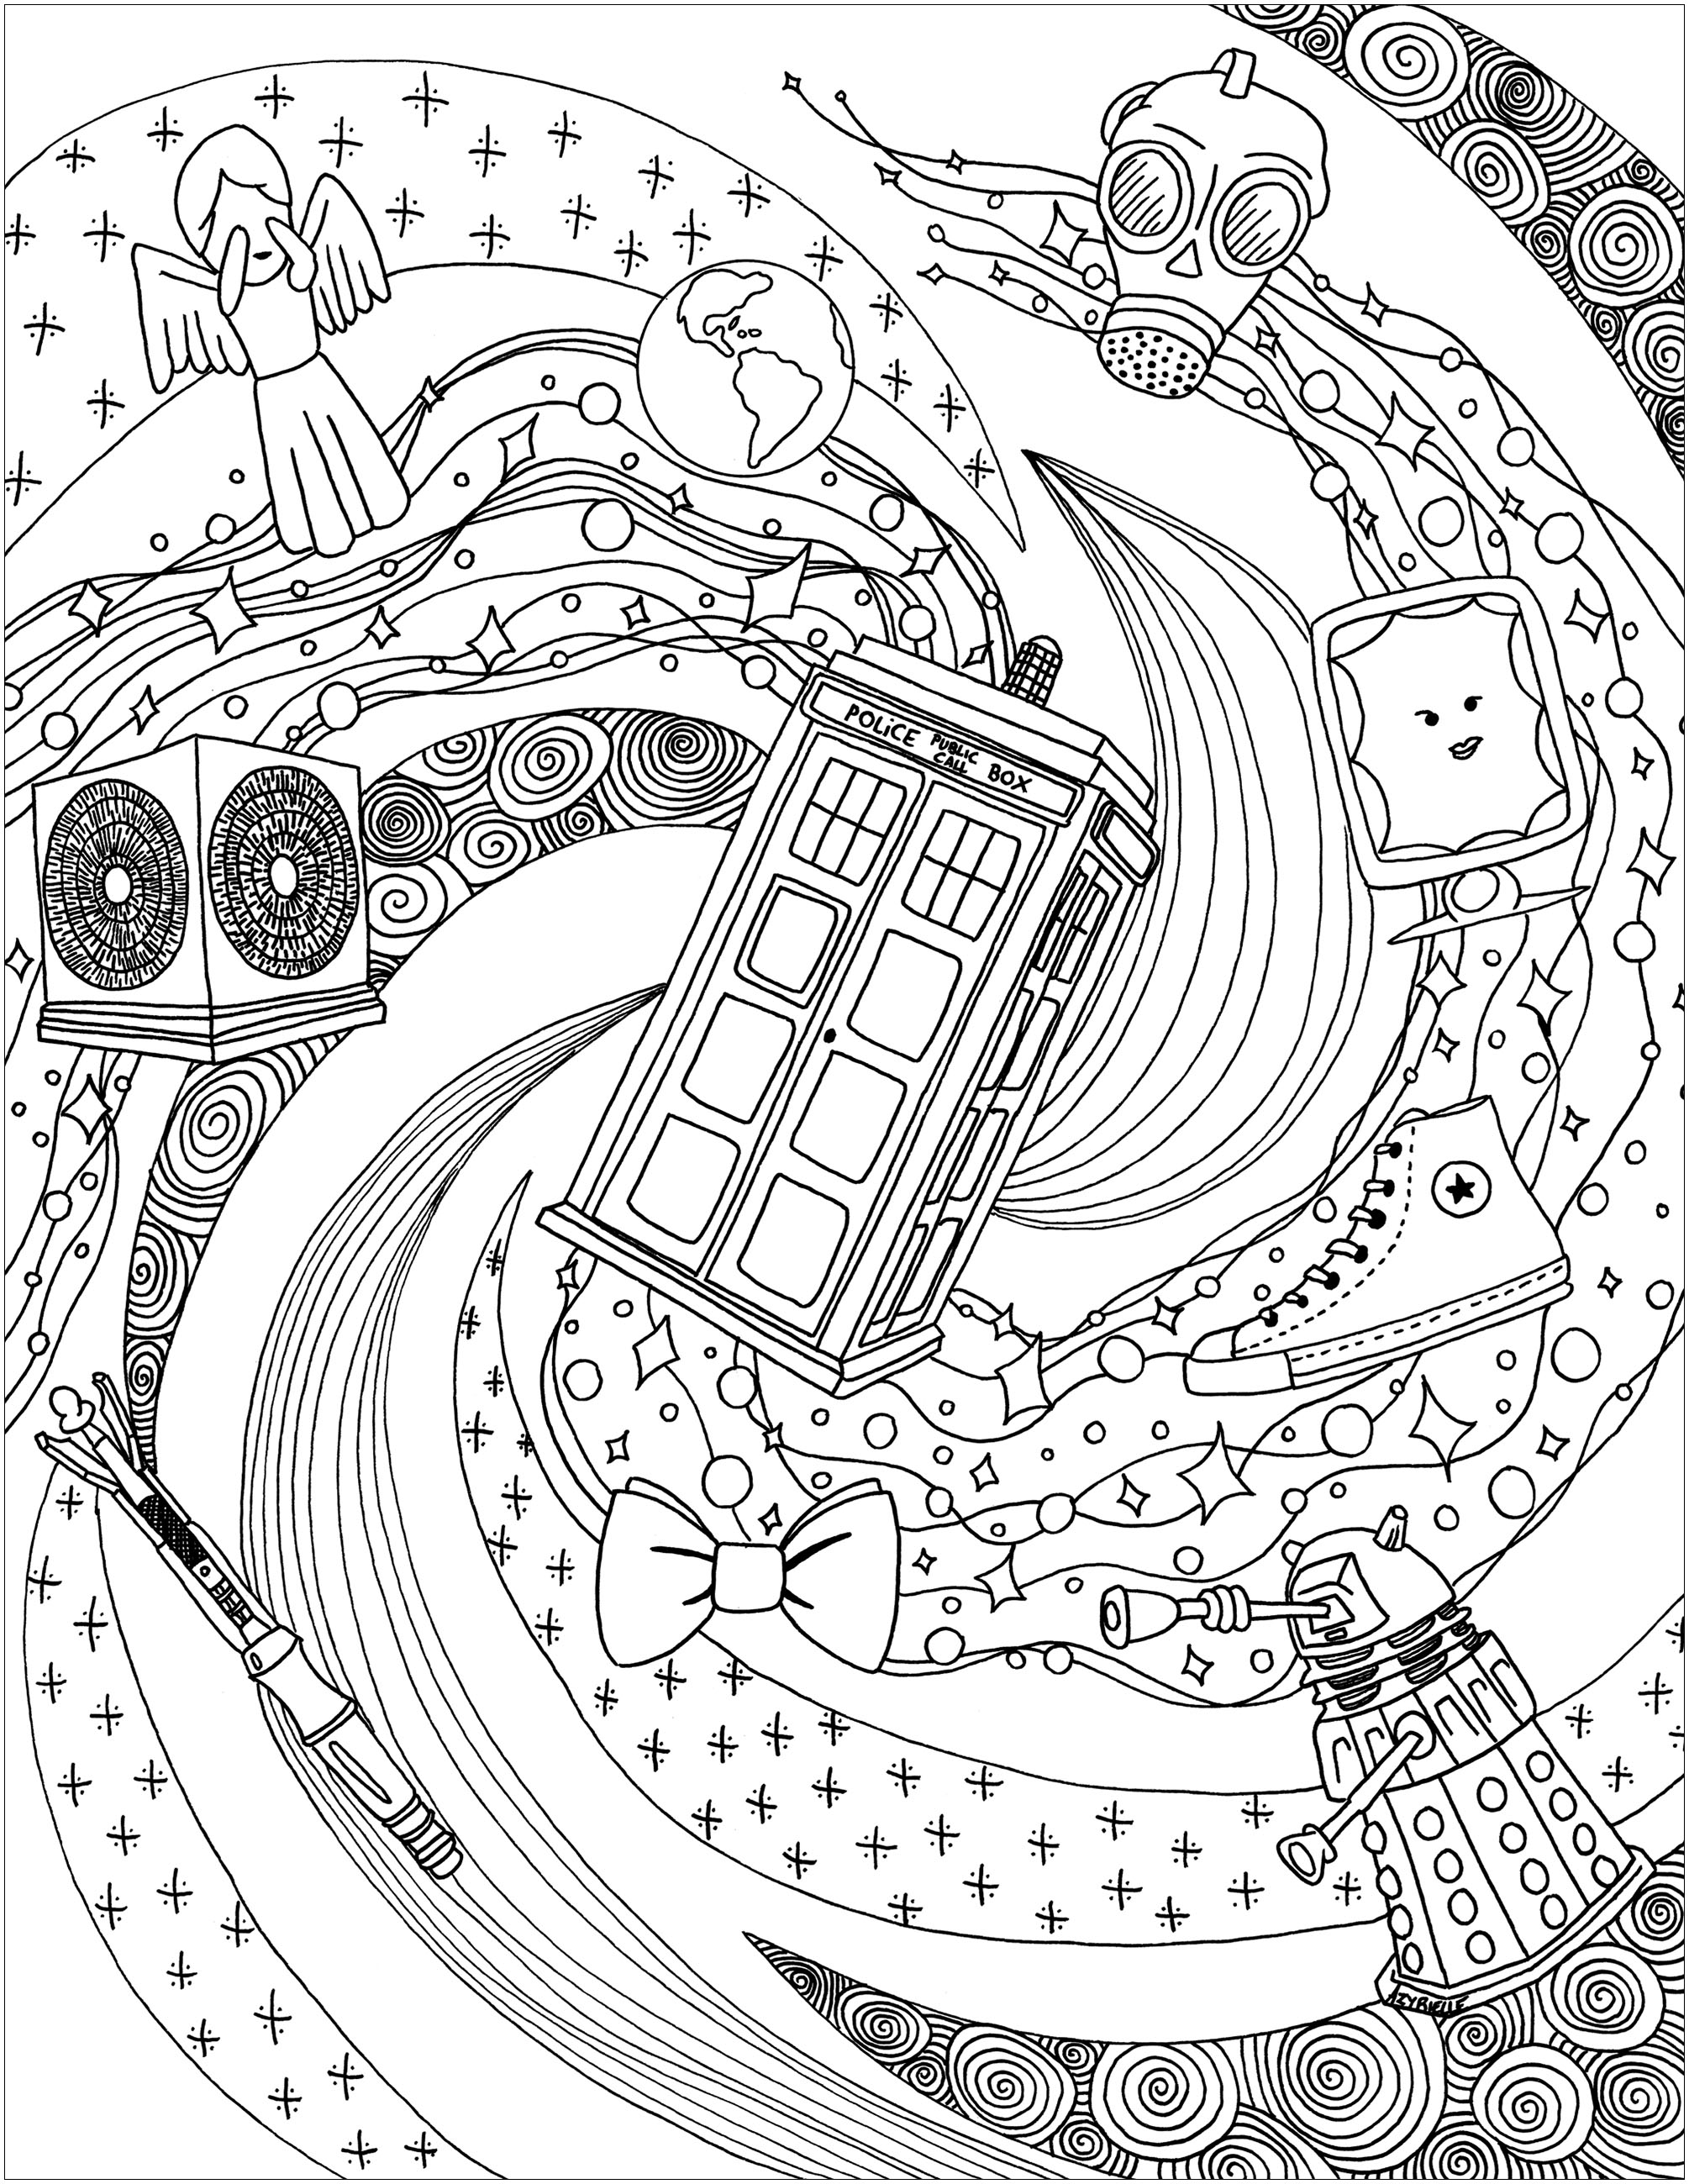 doctor who coloring page